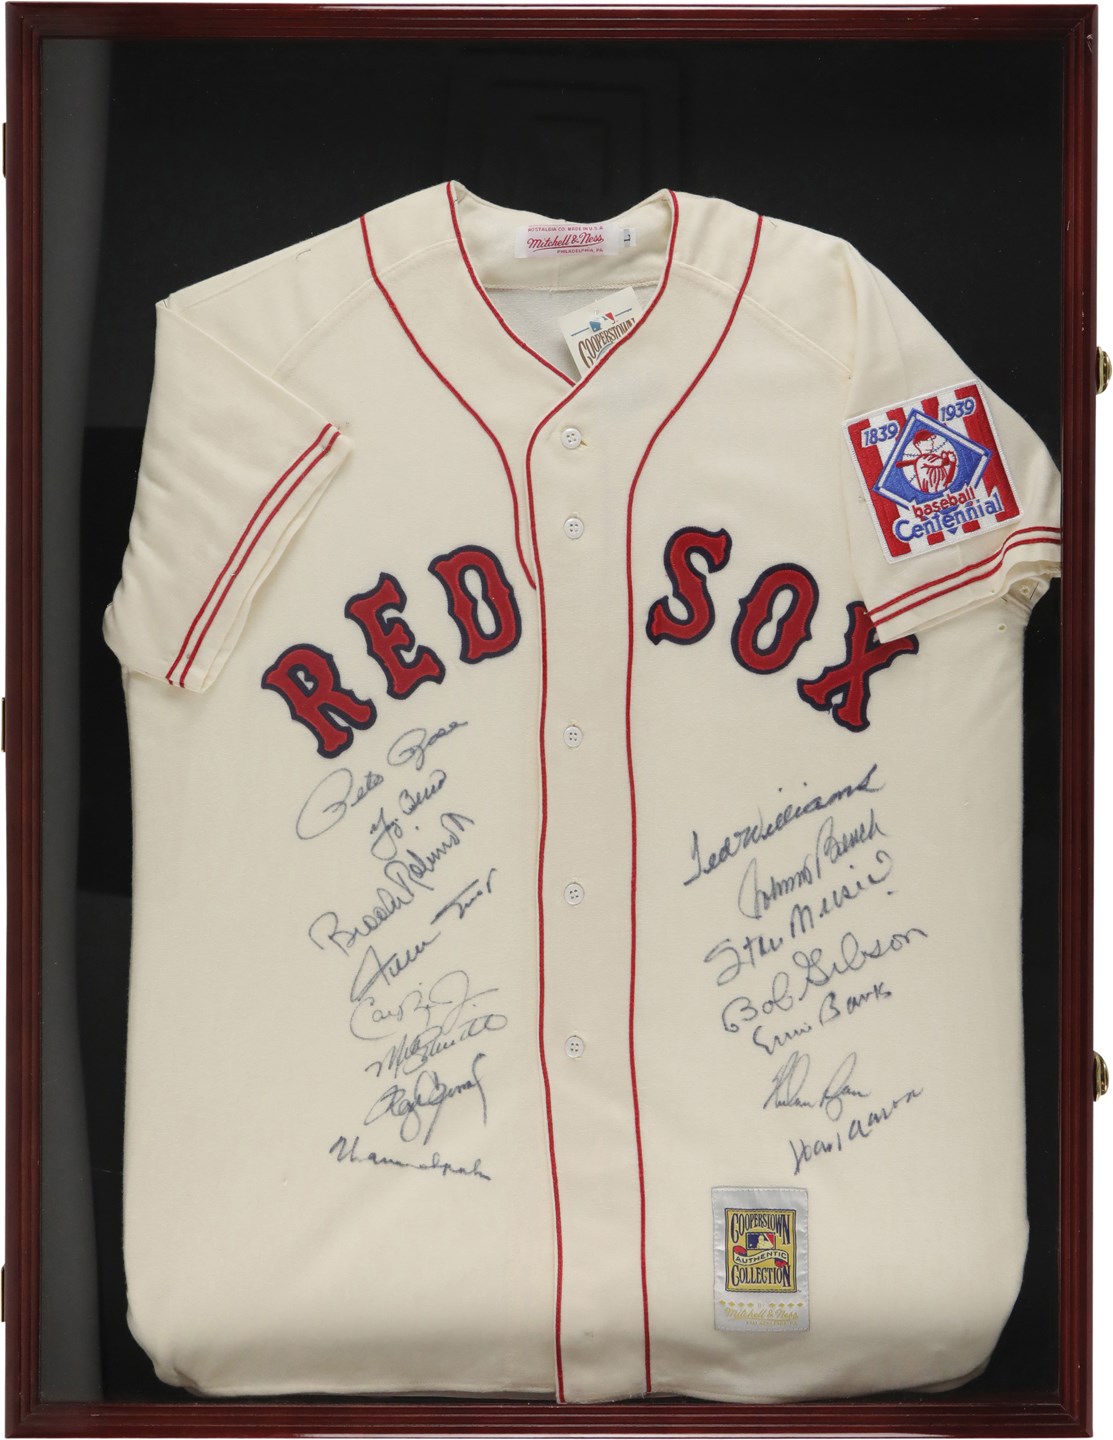 - Baseball All-Century Team Signed Commemorative Jersey - 15 Signatures Including Williams, Aaron, and Mays (PSA)